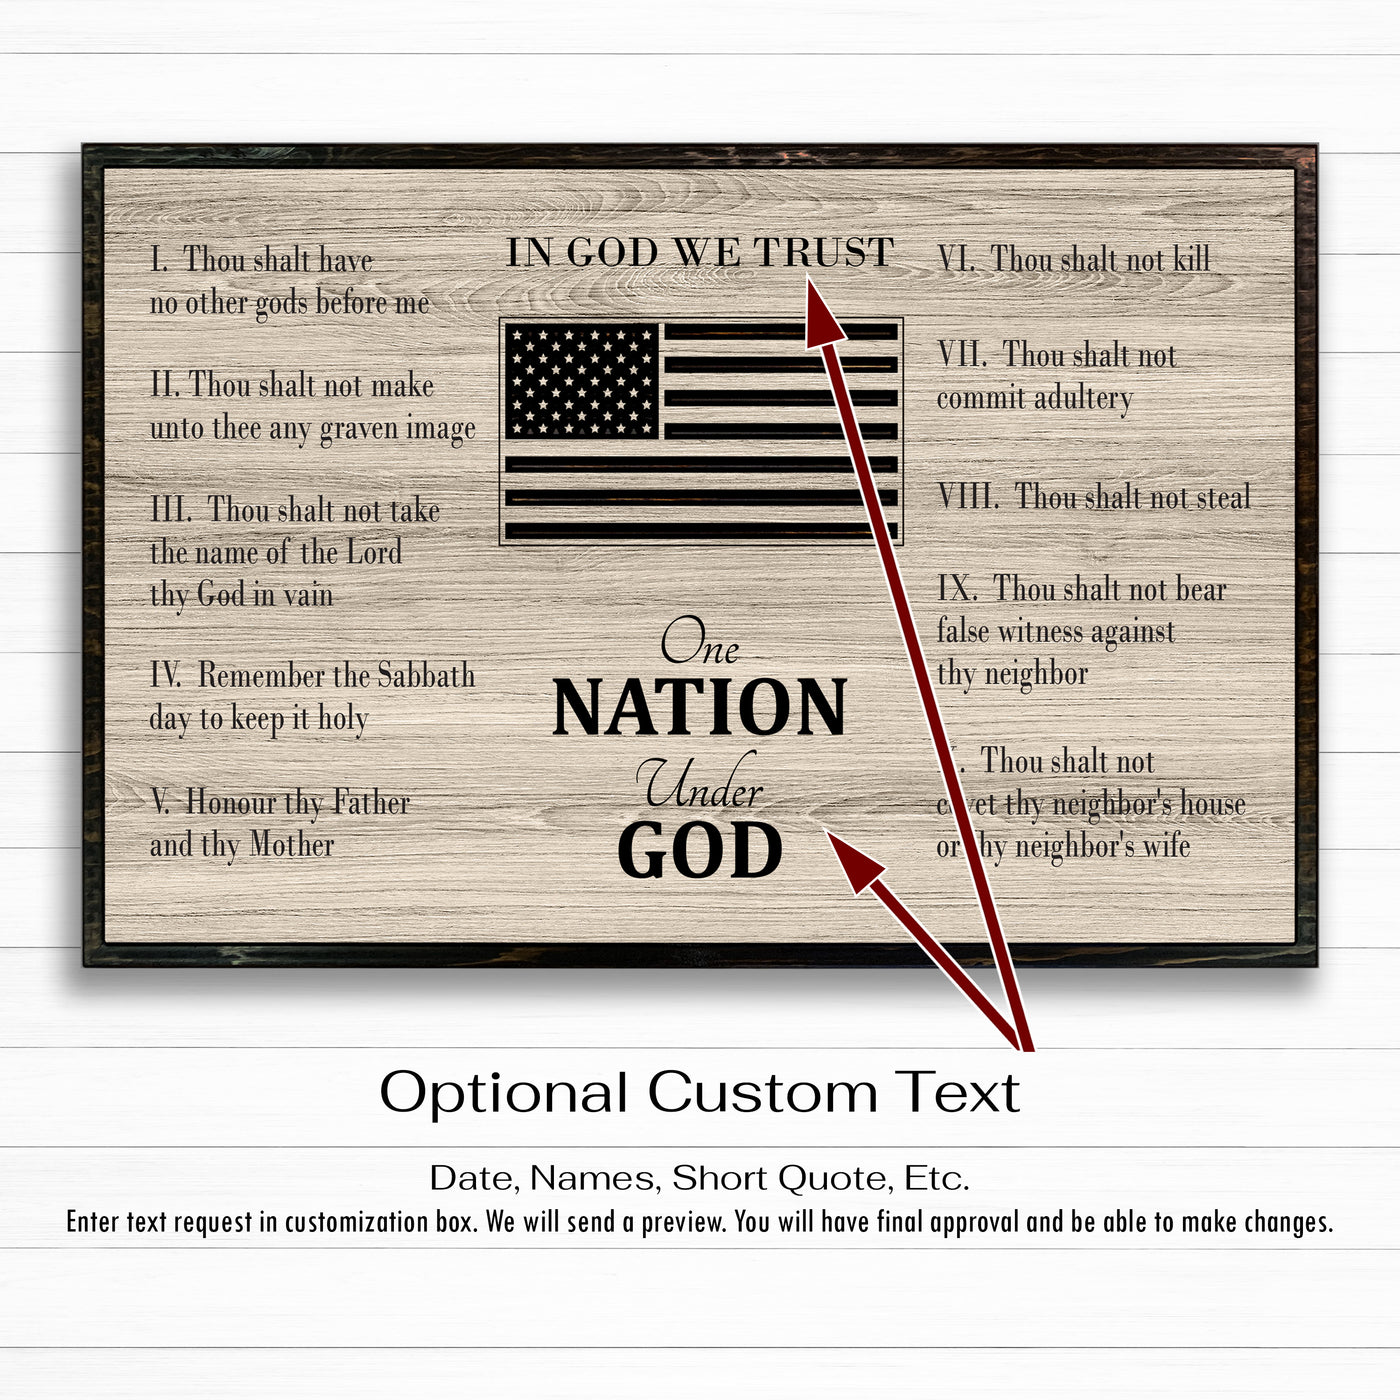 custom carved american flag & 10 commandments wood wall art. Spiritual and patriotic wall decor for Veteran's Day, Independence Day, and Memorial Day